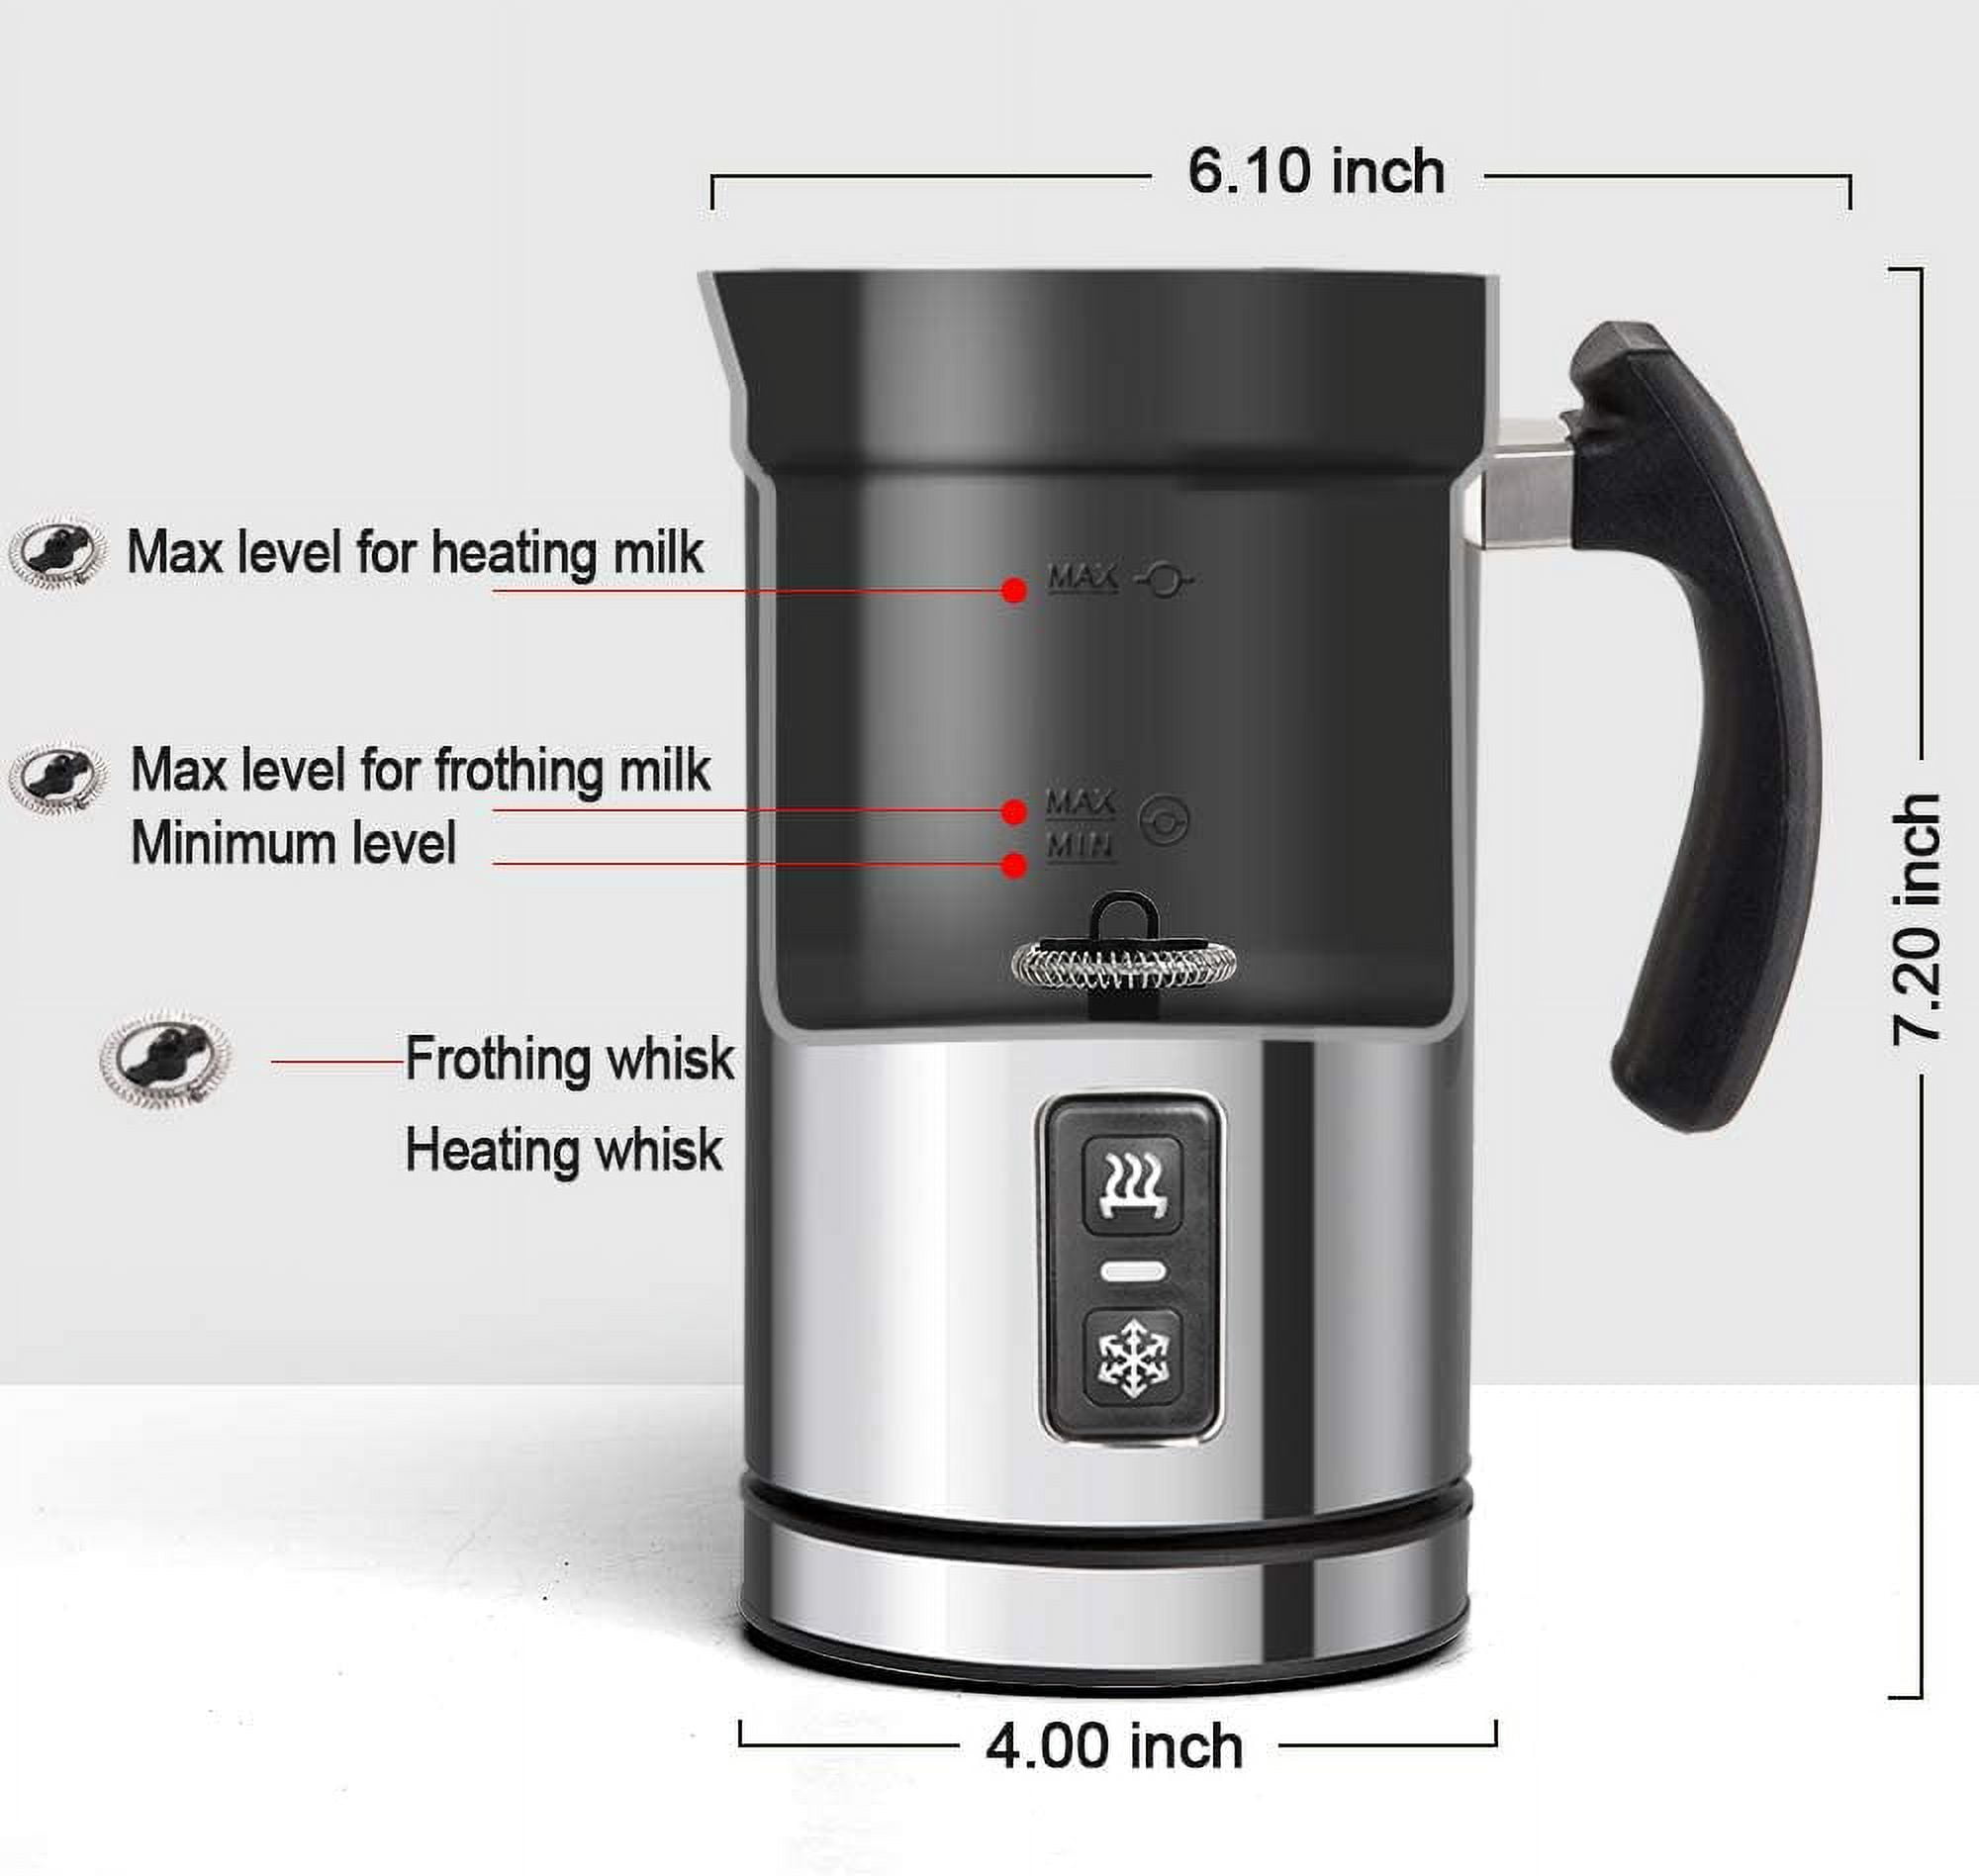 Secura Automatic Electric Milk Frother and Warmer 250ml FREE